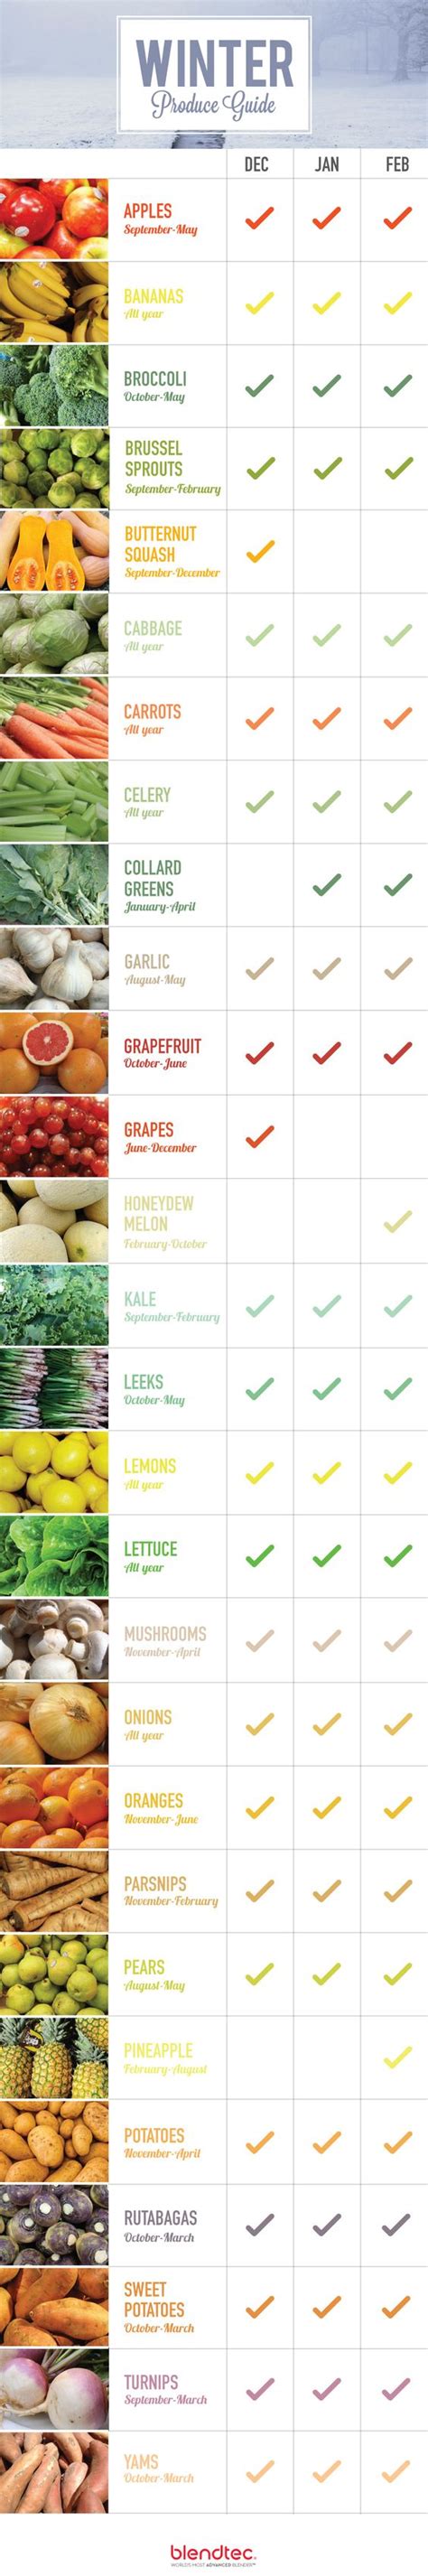 Whats In Season Winter Produce Guide The Winter Seasons And How To Use